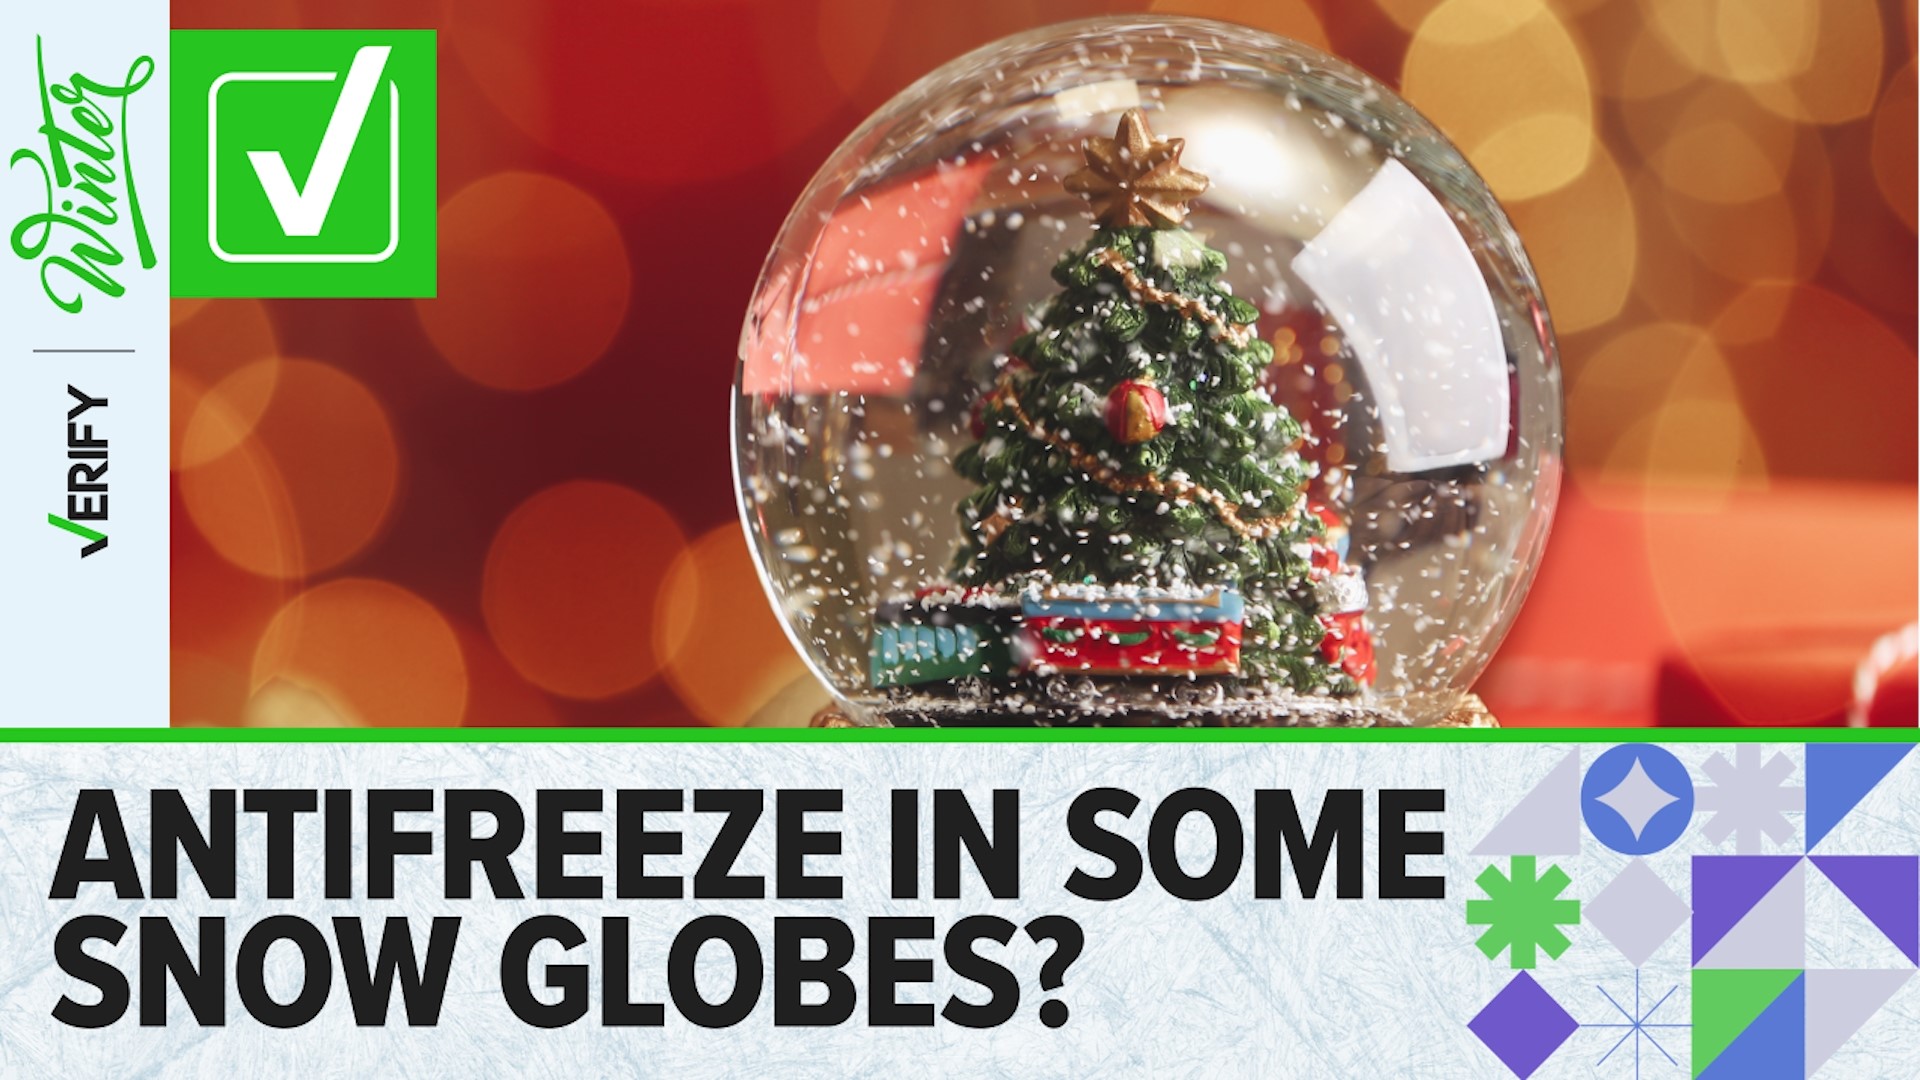 Some snow globes contain ethylene glycol, which is the main chemical used in some types of antifreeze. It’s dangerous for both pets and children to swallow.